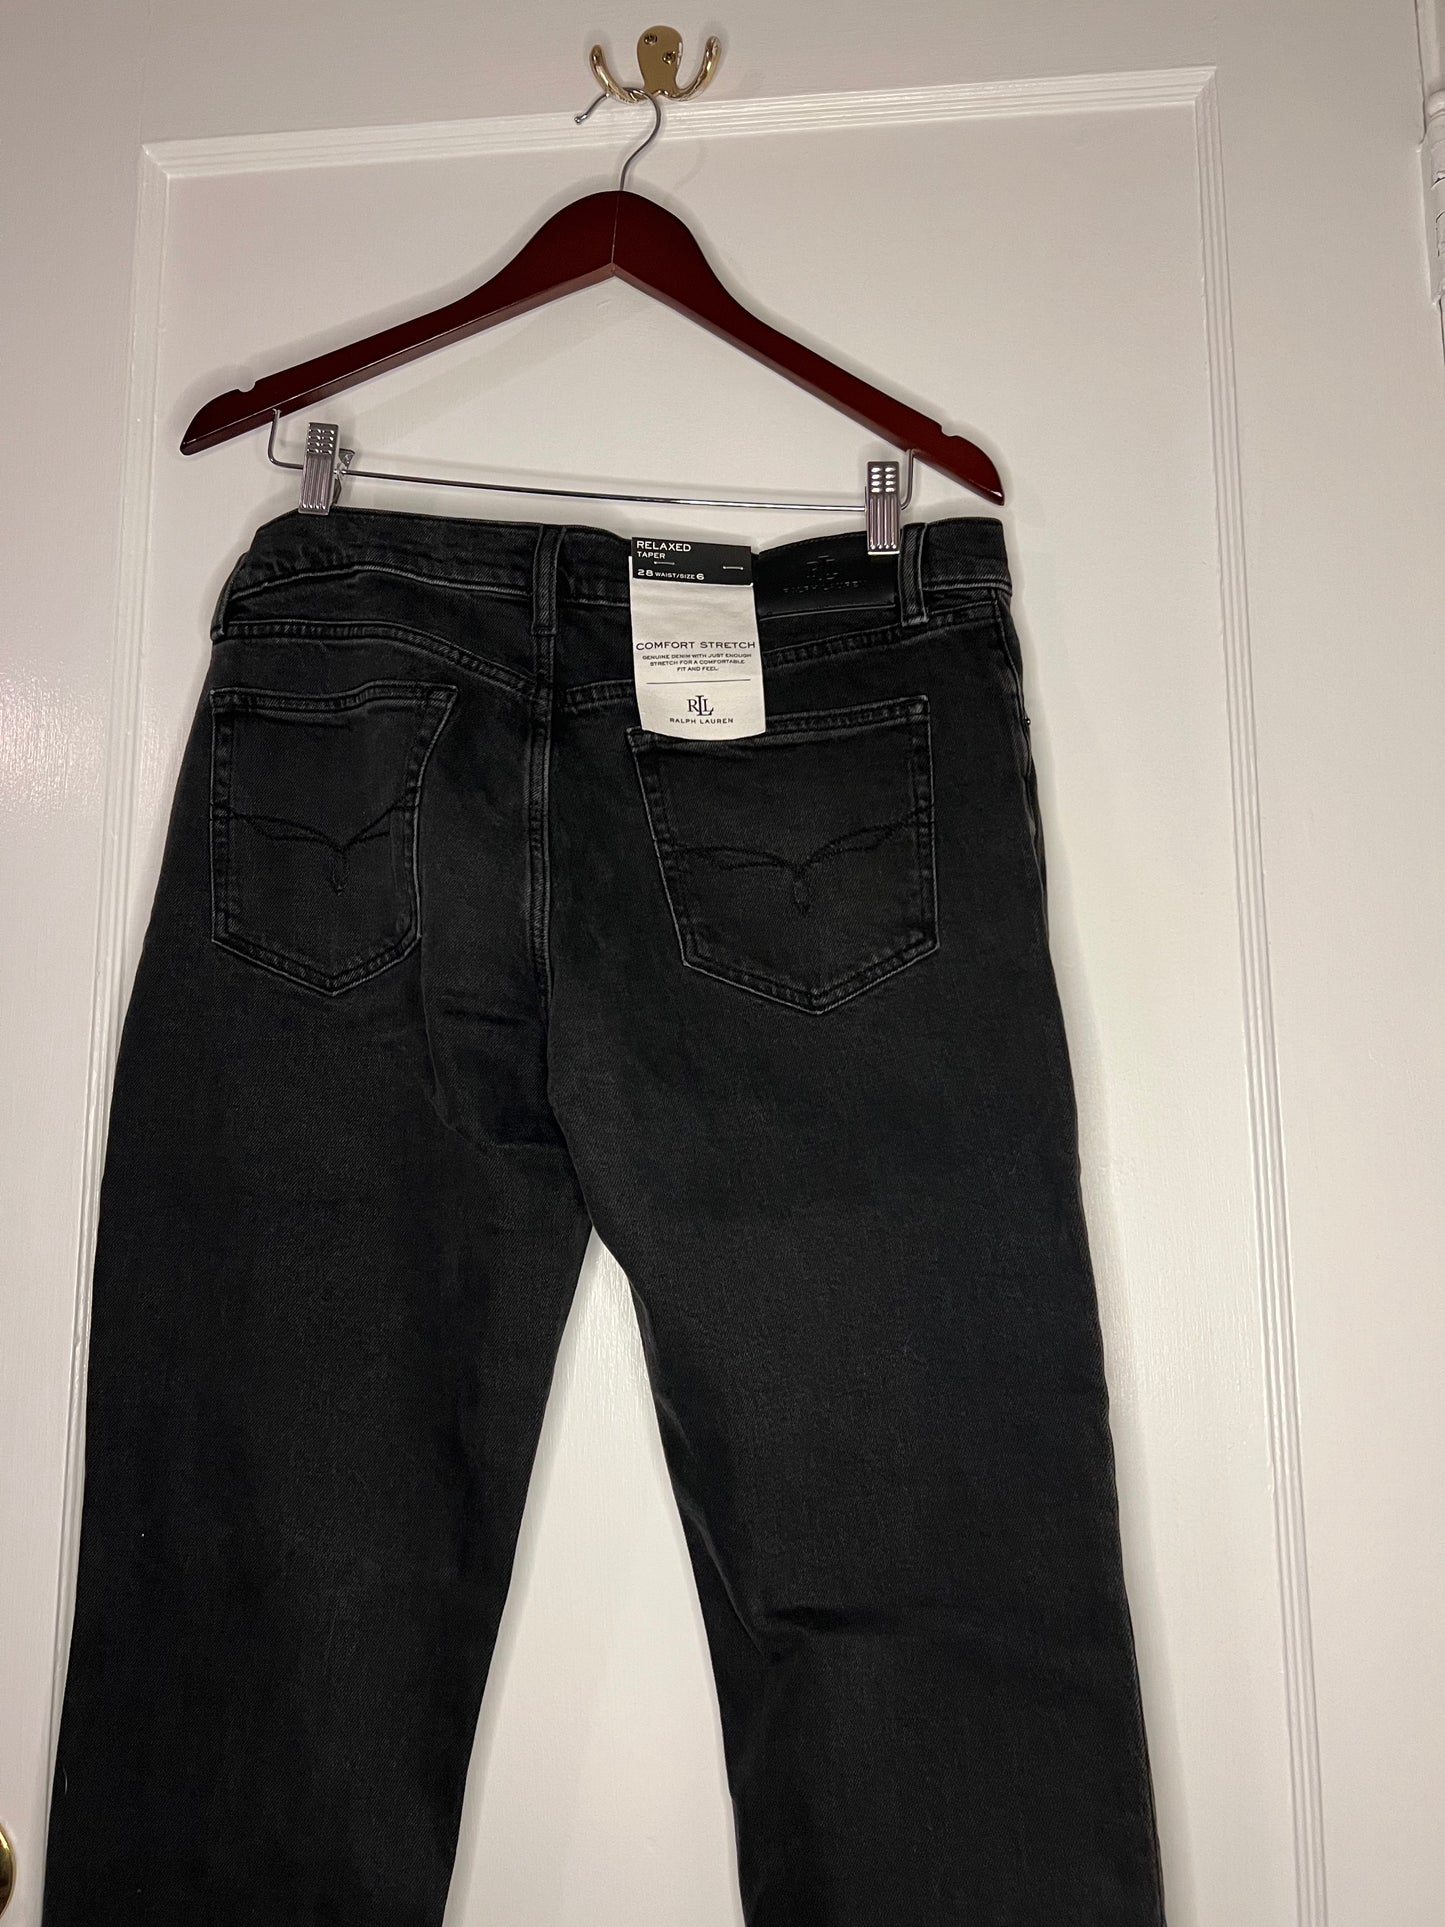 NWT Ralph Lauren Relaxed Fit Jeans Size 6 / 28 Waist PPU 45208 or SCO Spring Sale